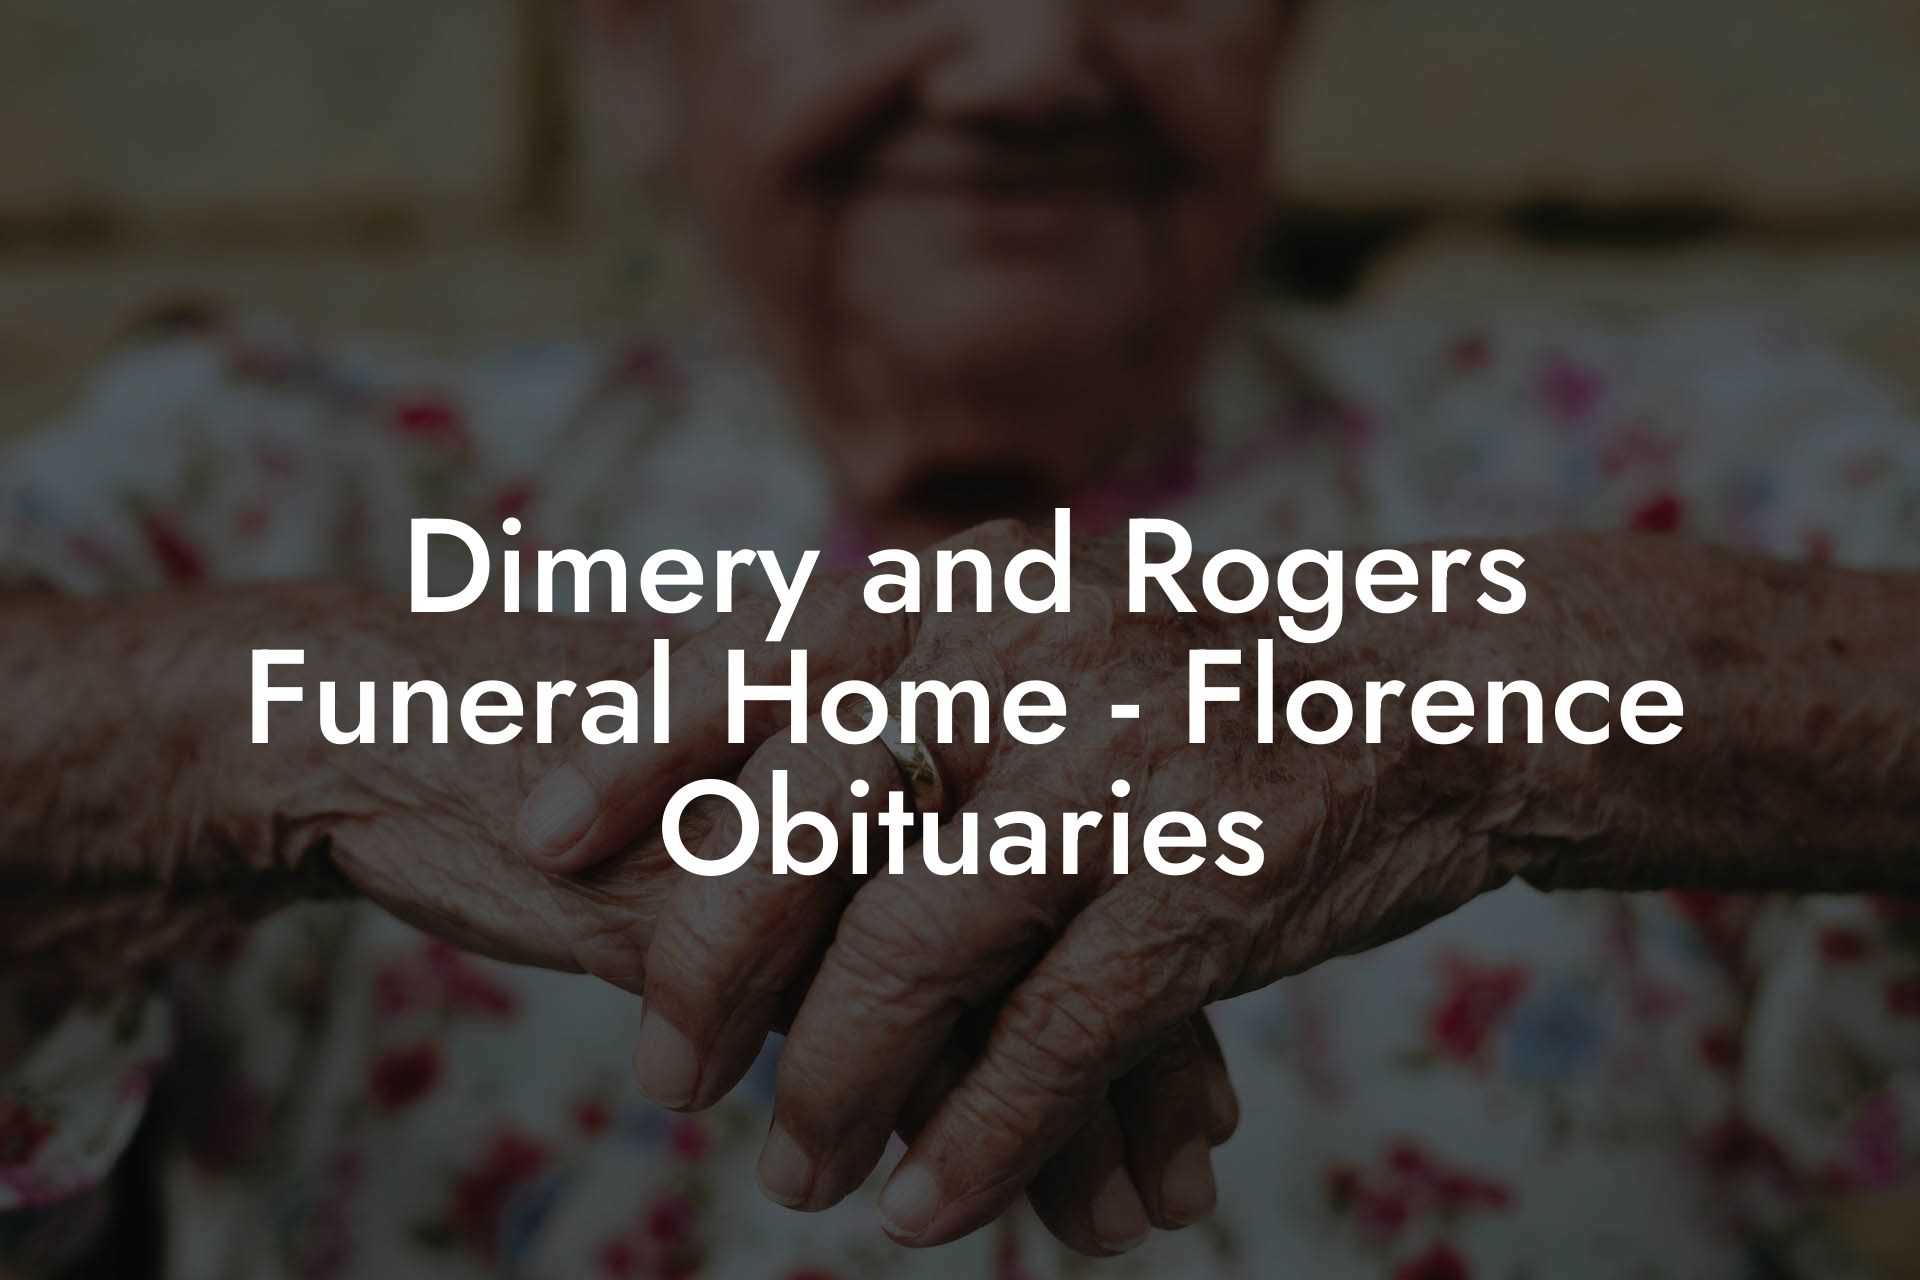 Dimery and Rogers Funeral Home - Florence Obituaries